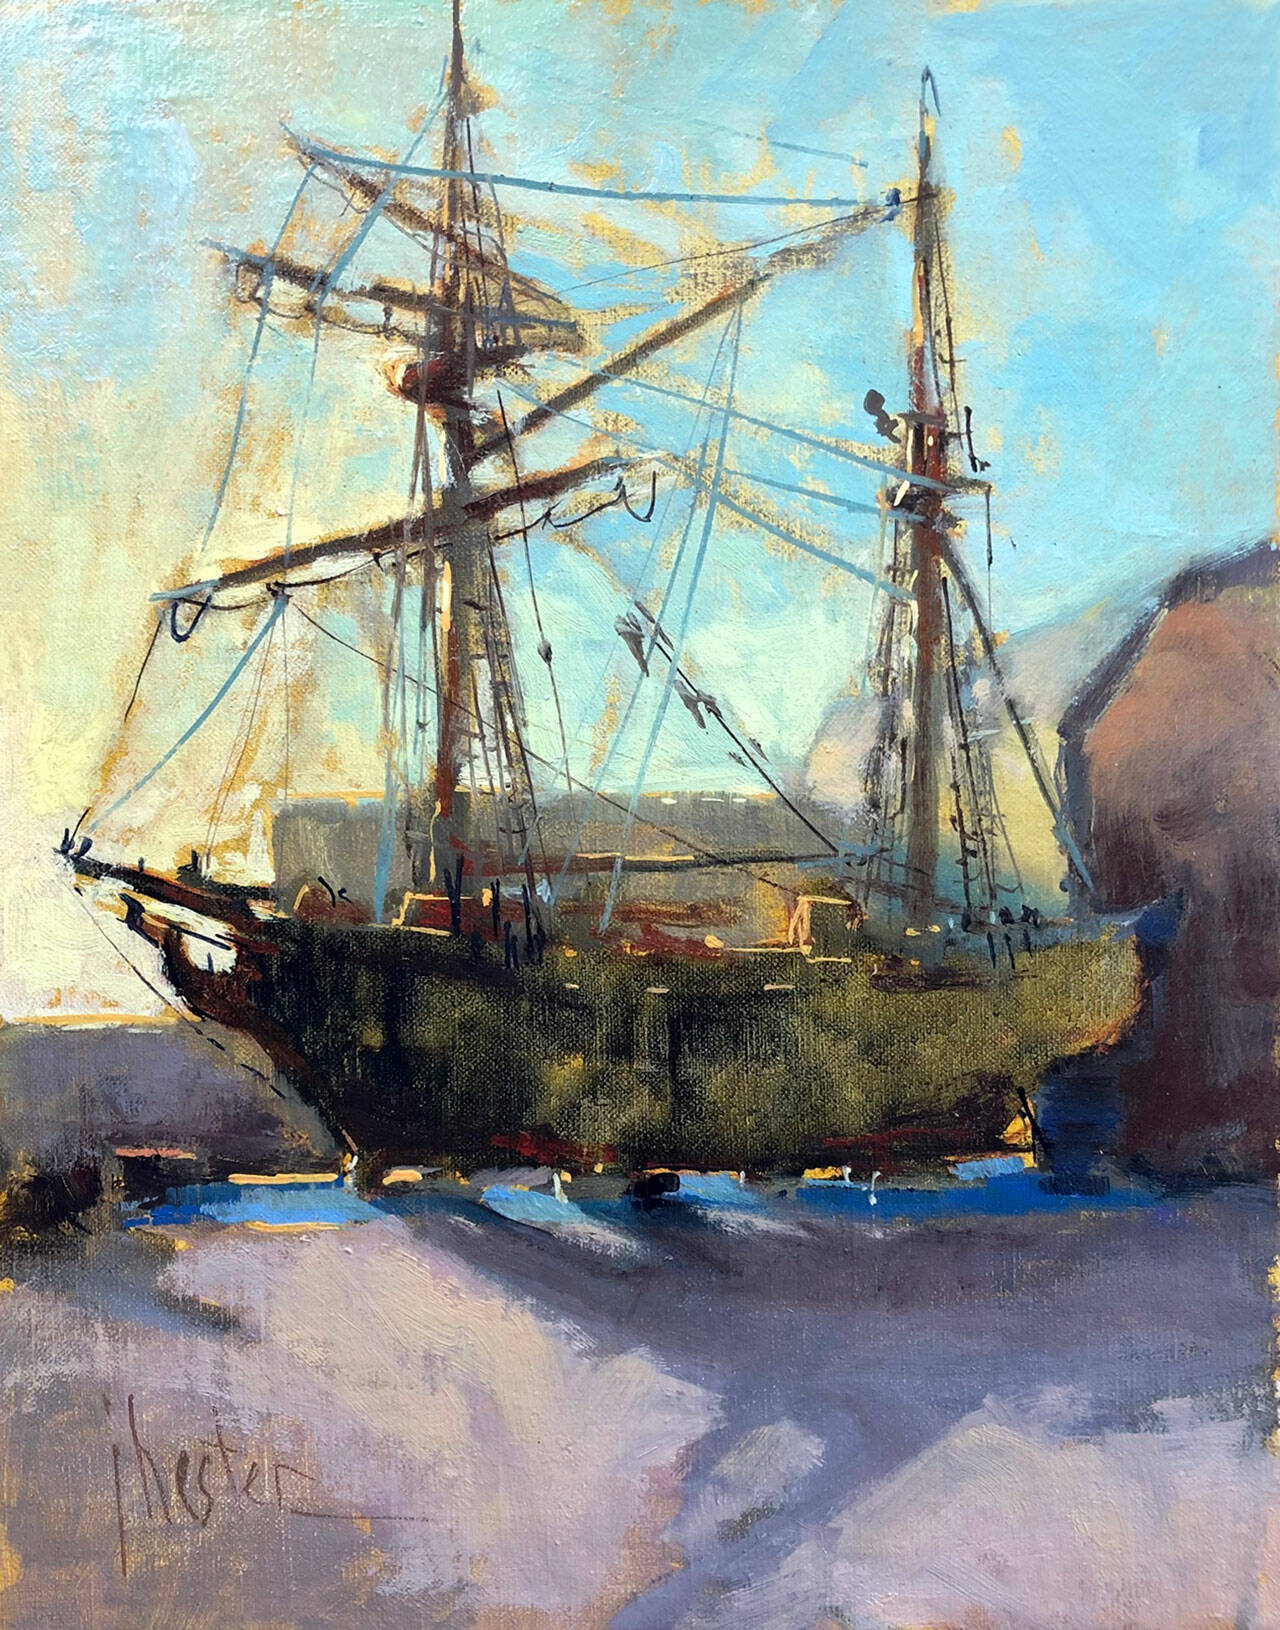 “The Last of the Hawaiian Chieftain” by Joyce Hester is part of the “Weather or Not” plein air show closing Sunday at Northwind Art’s gallery in downtown Port Townsend.